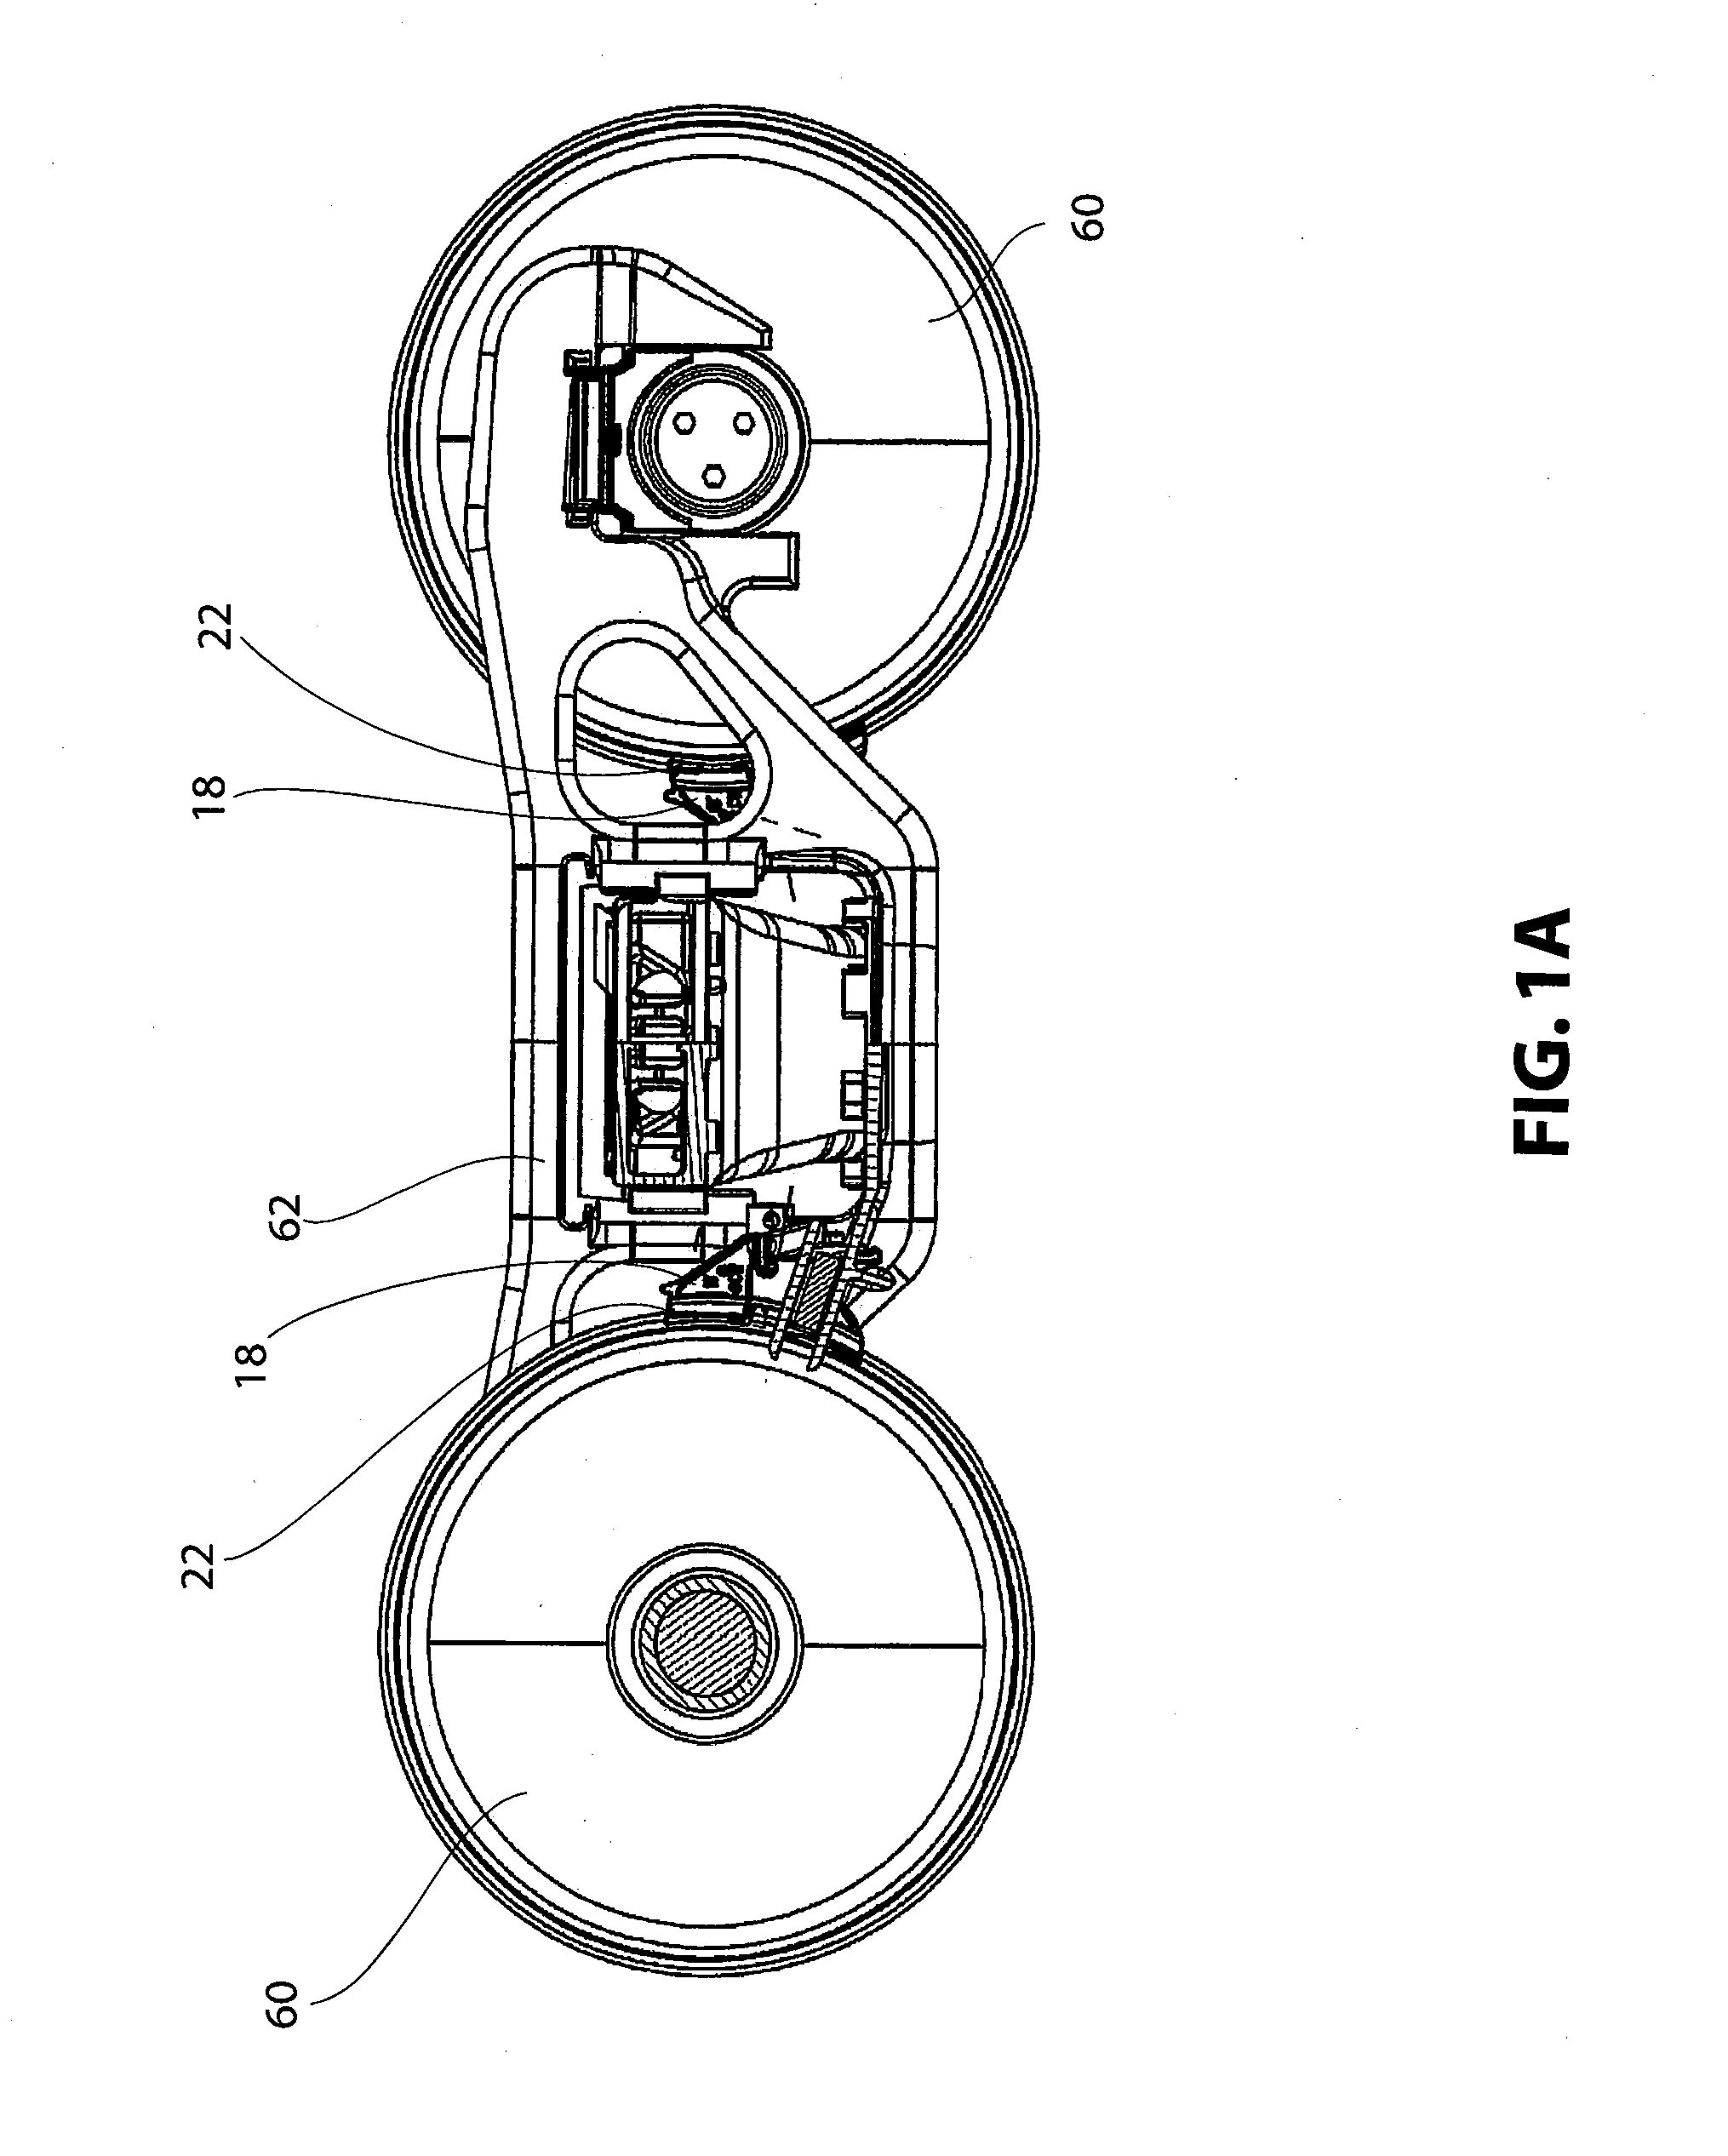 Corrective device for uneven brake shoe wear